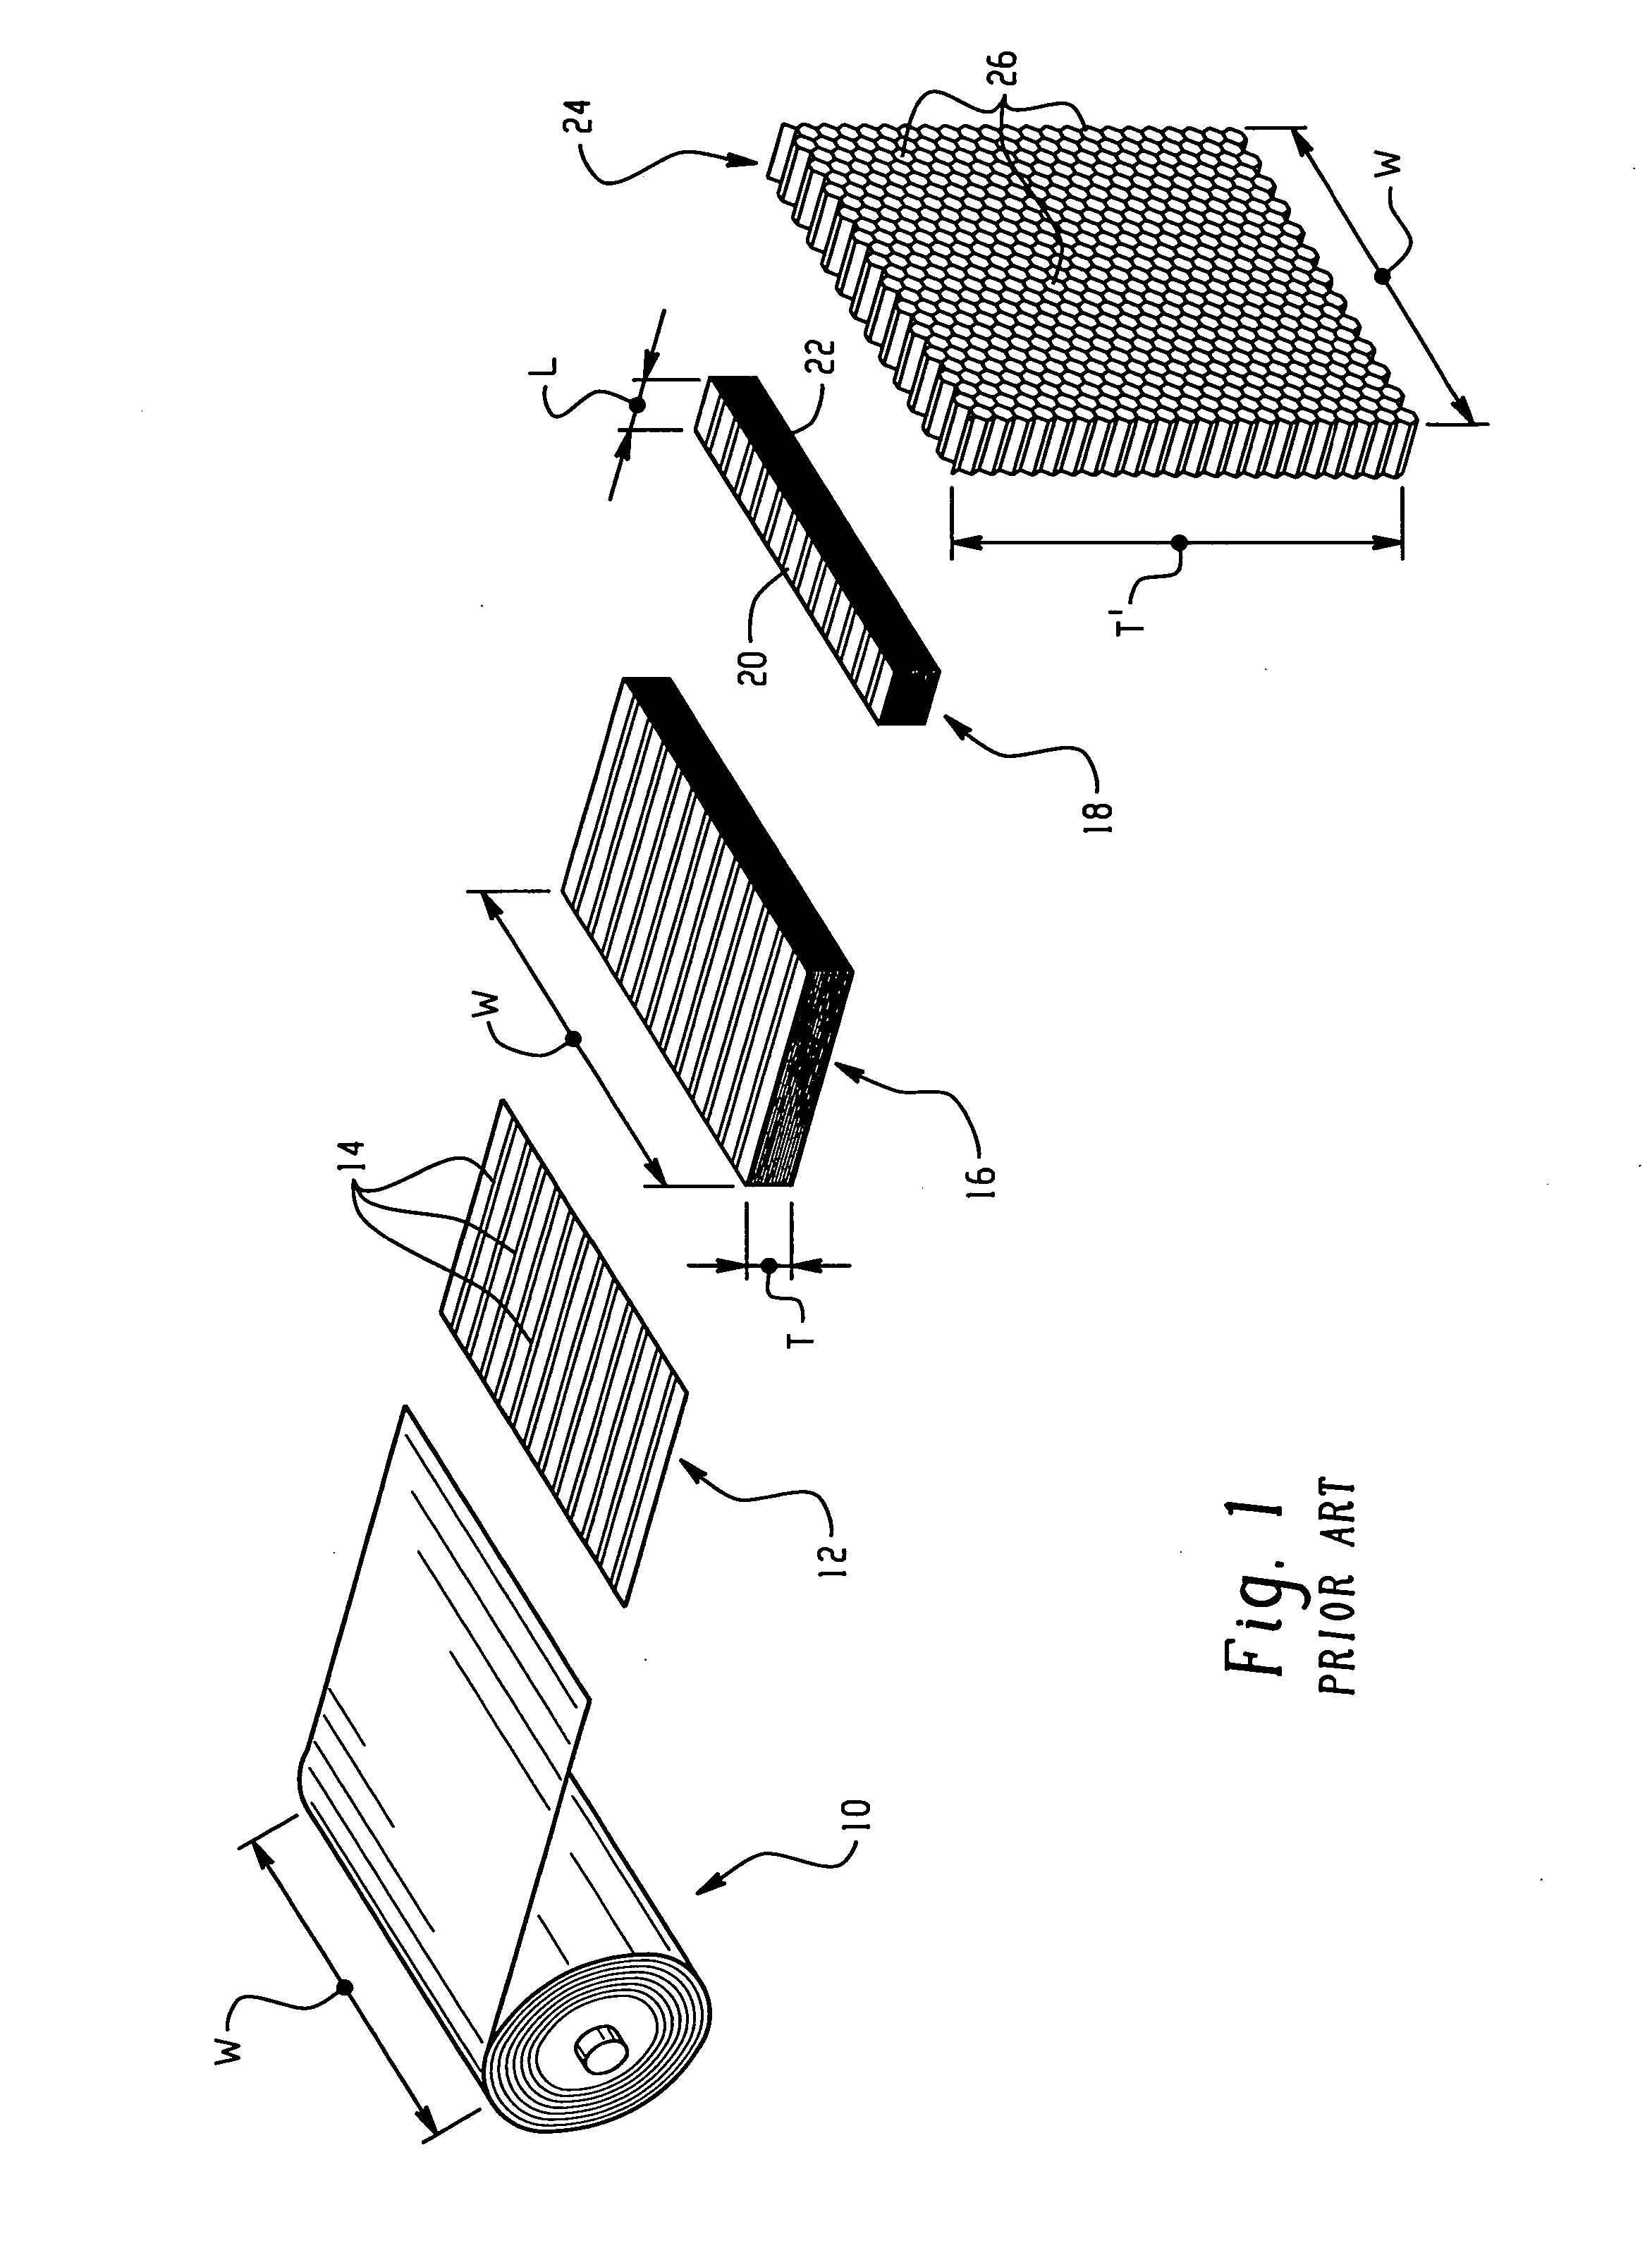 Volume-filling mechanical assemblies and methods of operating the same